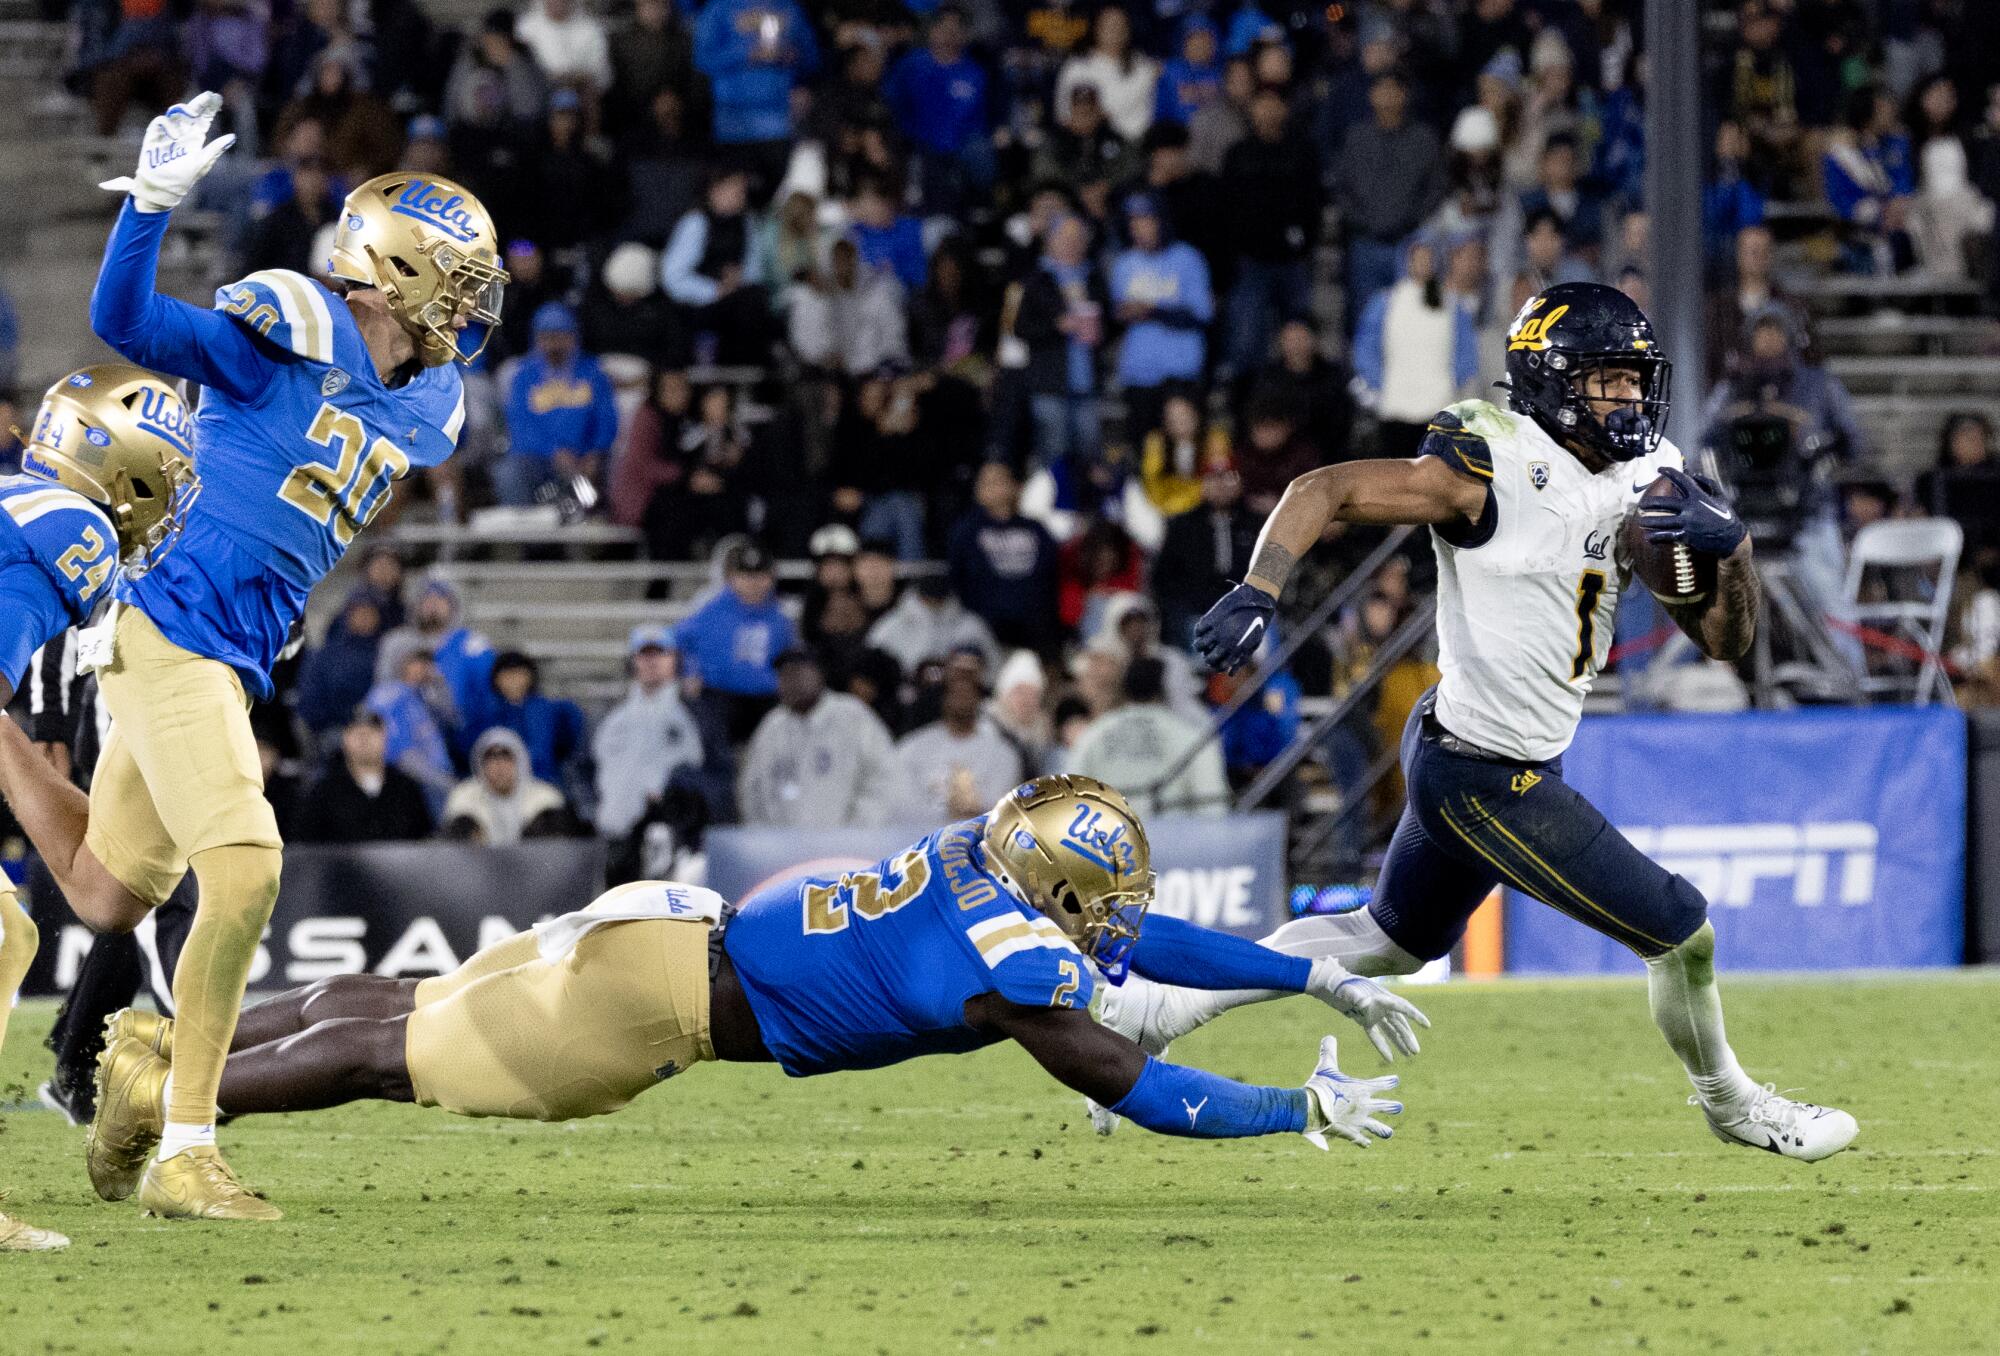 Cal running back Jaydn Ott evades a tackle attempt by UCLA linebacker Oluwafemi Oladejo at the Rose Bowl Saturday.